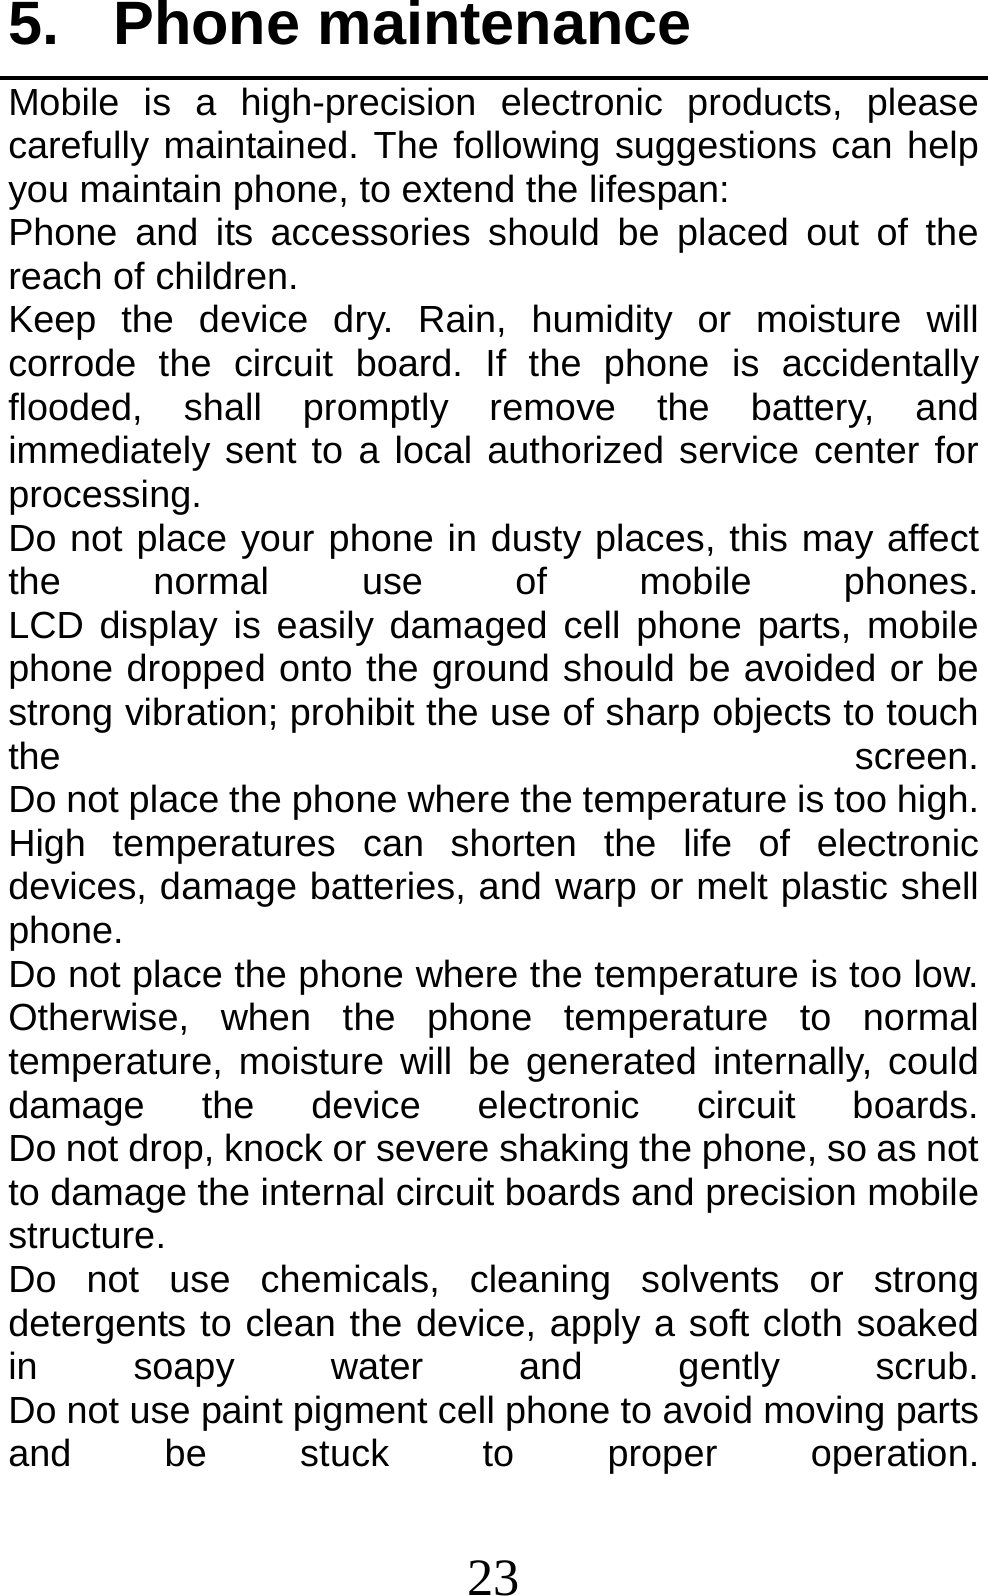 23 5. Phone maintenance Mobile is a high-precision electronic products, please carefully maintained. The following suggestions can help you maintain phone, to extend the lifespan: Phone and its accessories should be placed out of the reach of children.              Keep the device dry. Rain, humidity or moisture will corrode the circuit board. If the phone is accidentally flooded, shall promptly remove the battery, and immediately sent to a local authorized service center for processing.        Do not place your phone in dusty places, this may affect the  normal  use  of  mobile  phones.         LCD display is easily damaged cell phone parts, mobile phone dropped onto the ground should be avoided or be strong vibration; prohibit the use of sharp objects to touch the  screen.         Do not place the phone where the temperature is too high. High temperatures can shorten the life of electronic devices, damage batteries, and warp or melt plastic shell phone.                                                    Do not place the phone where the temperature is too low. Otherwise, when the phone temperature to normal temperature, moisture will be generated internally, could damage  the  device  electronic  circuit  boards.         Do not drop, knock or severe shaking the phone, so as not to damage the internal circuit boards and precision mobile structure.                                     Do not use chemicals, cleaning solvents or strong detergents to clean the device, apply a soft cloth soaked in soapy water and gently scrub.         Do not use paint pigment cell phone to avoid moving parts and be stuck to proper operation.        